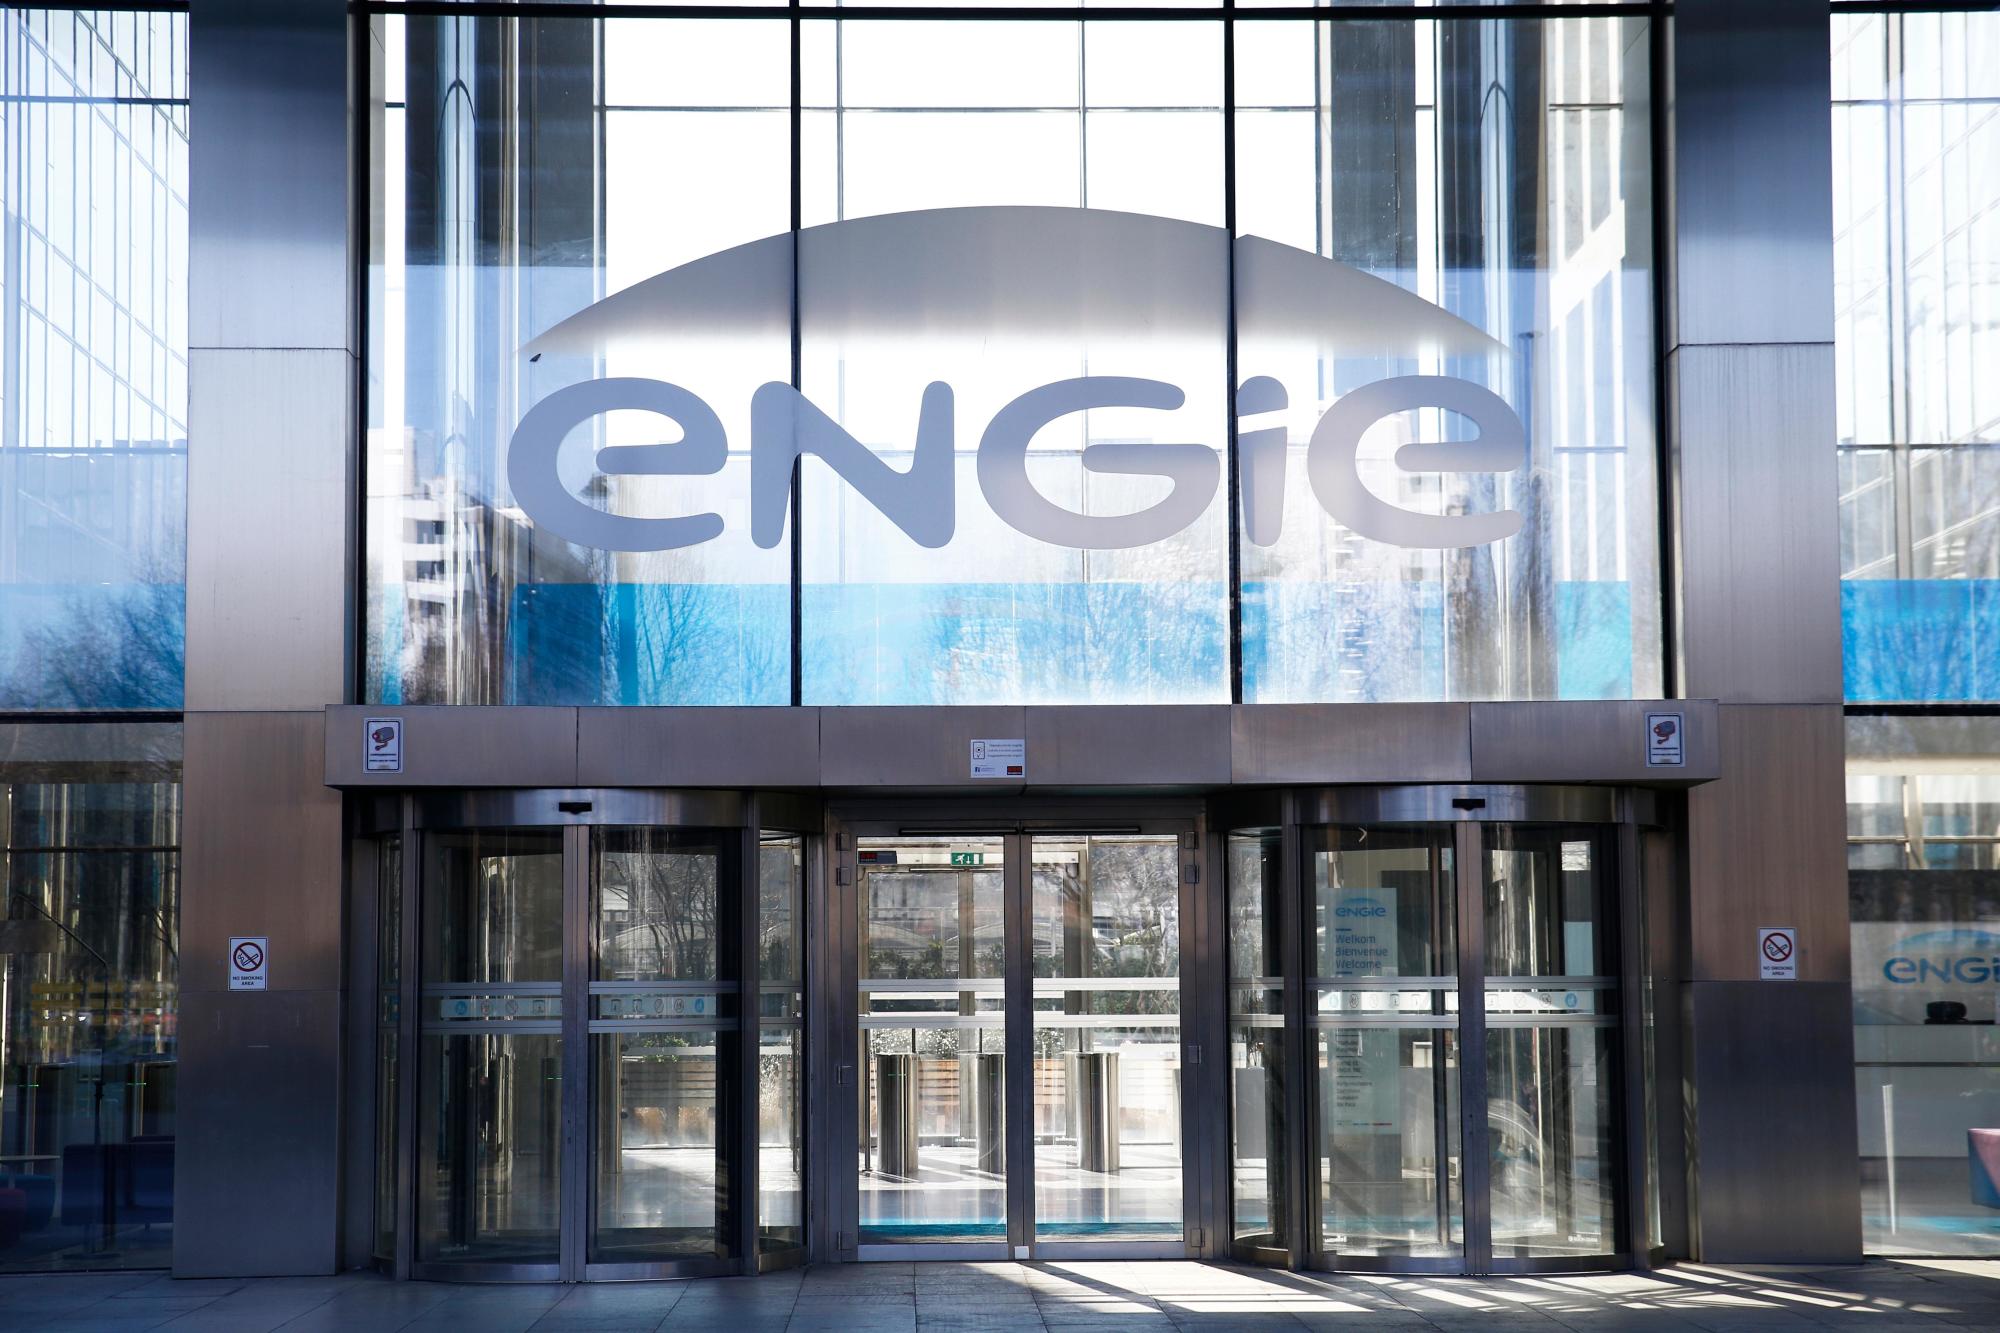 Contractor Asked to Leave Engie Site 48 Hours After Whistleblowing